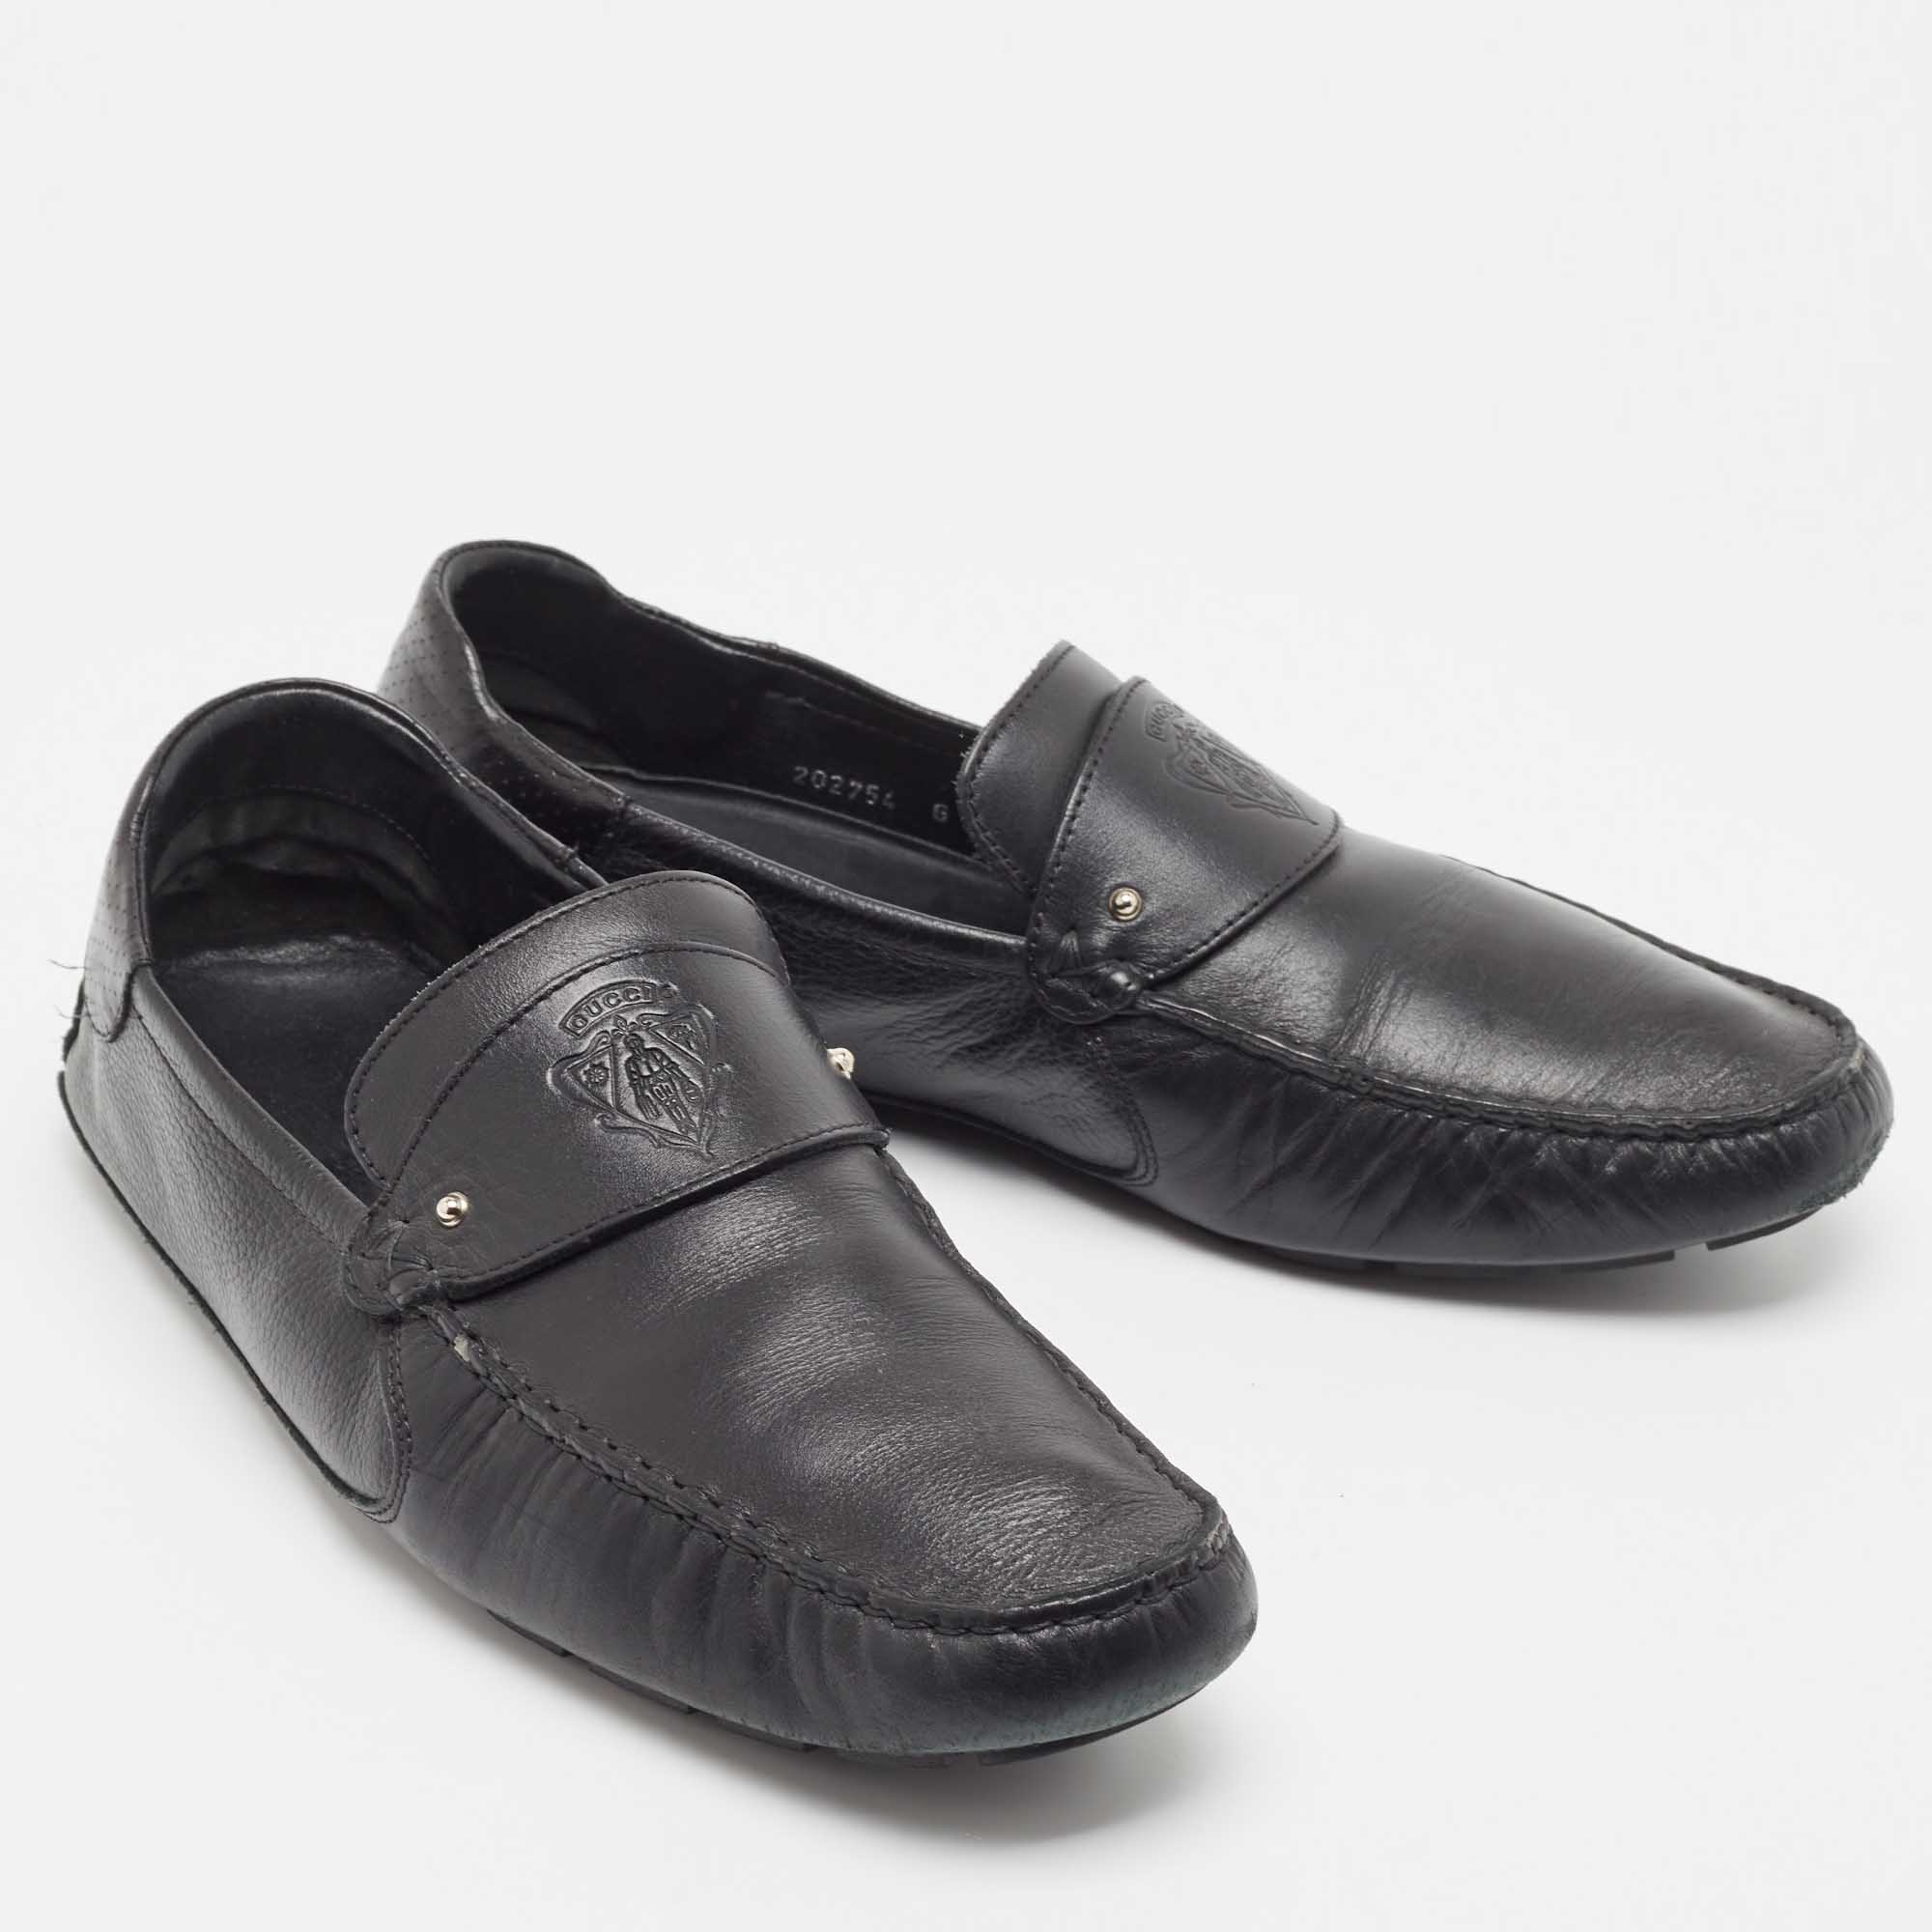 Gucci Black Leather Slip On Loafers Size 44.5